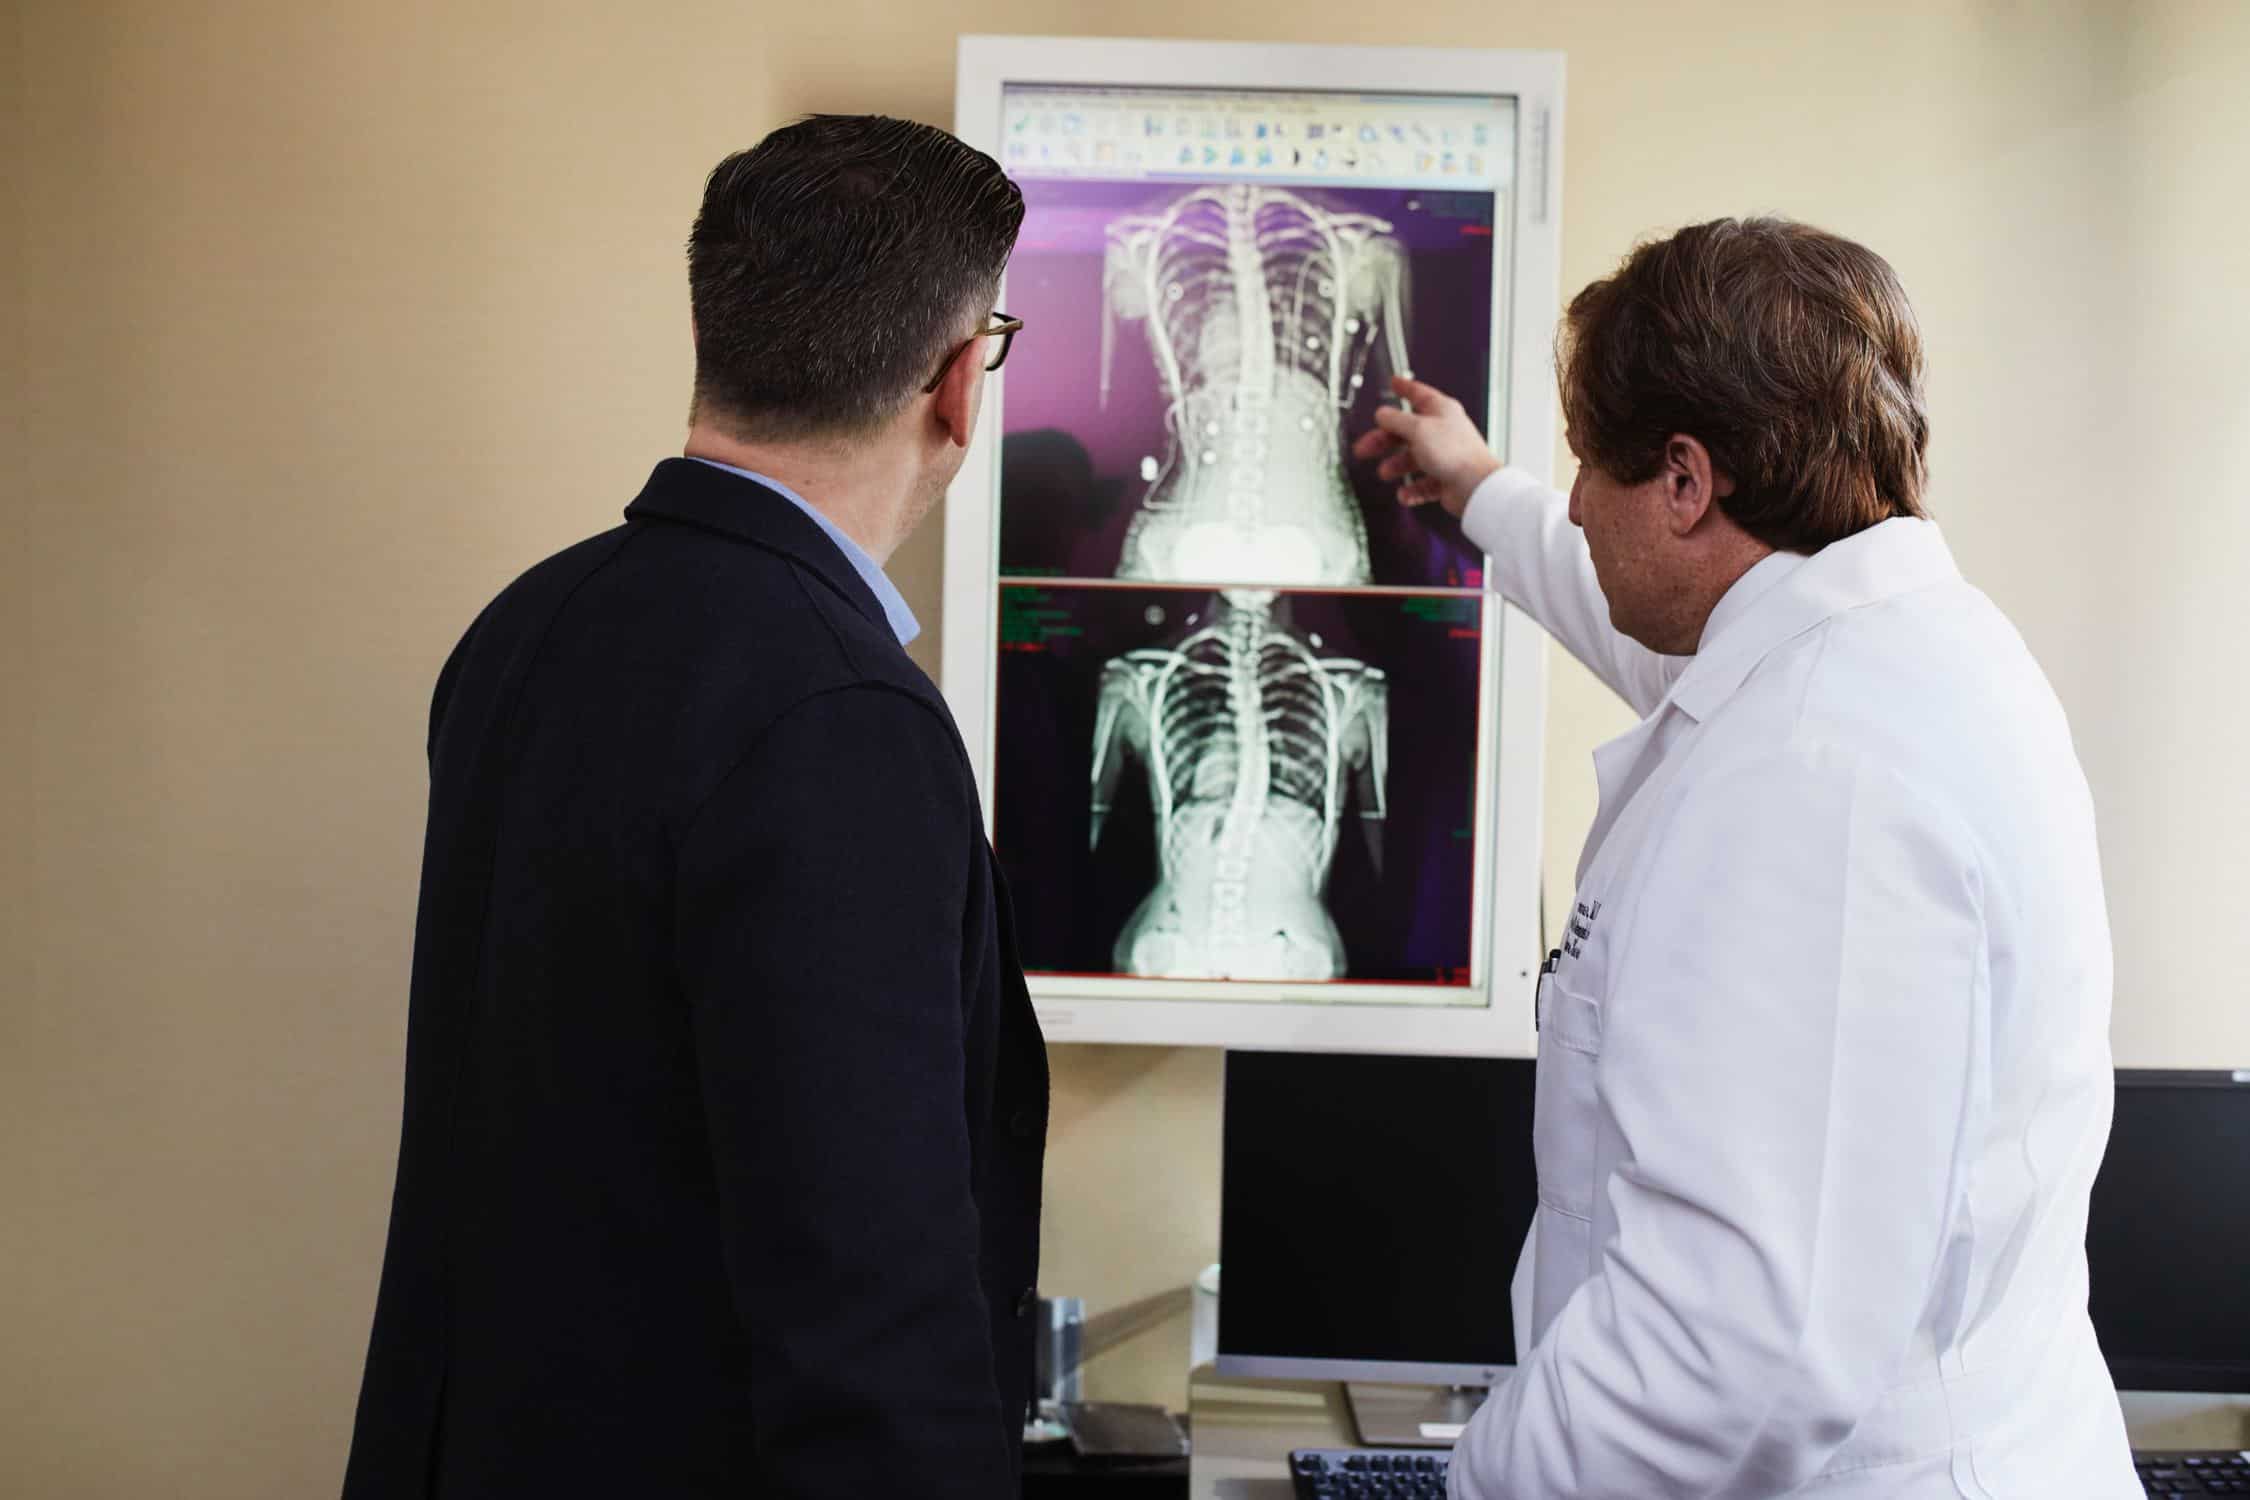 a doctor and patient, both white men look at a series of CAT scans on a light board. The doctor is gesturing at one of the images.